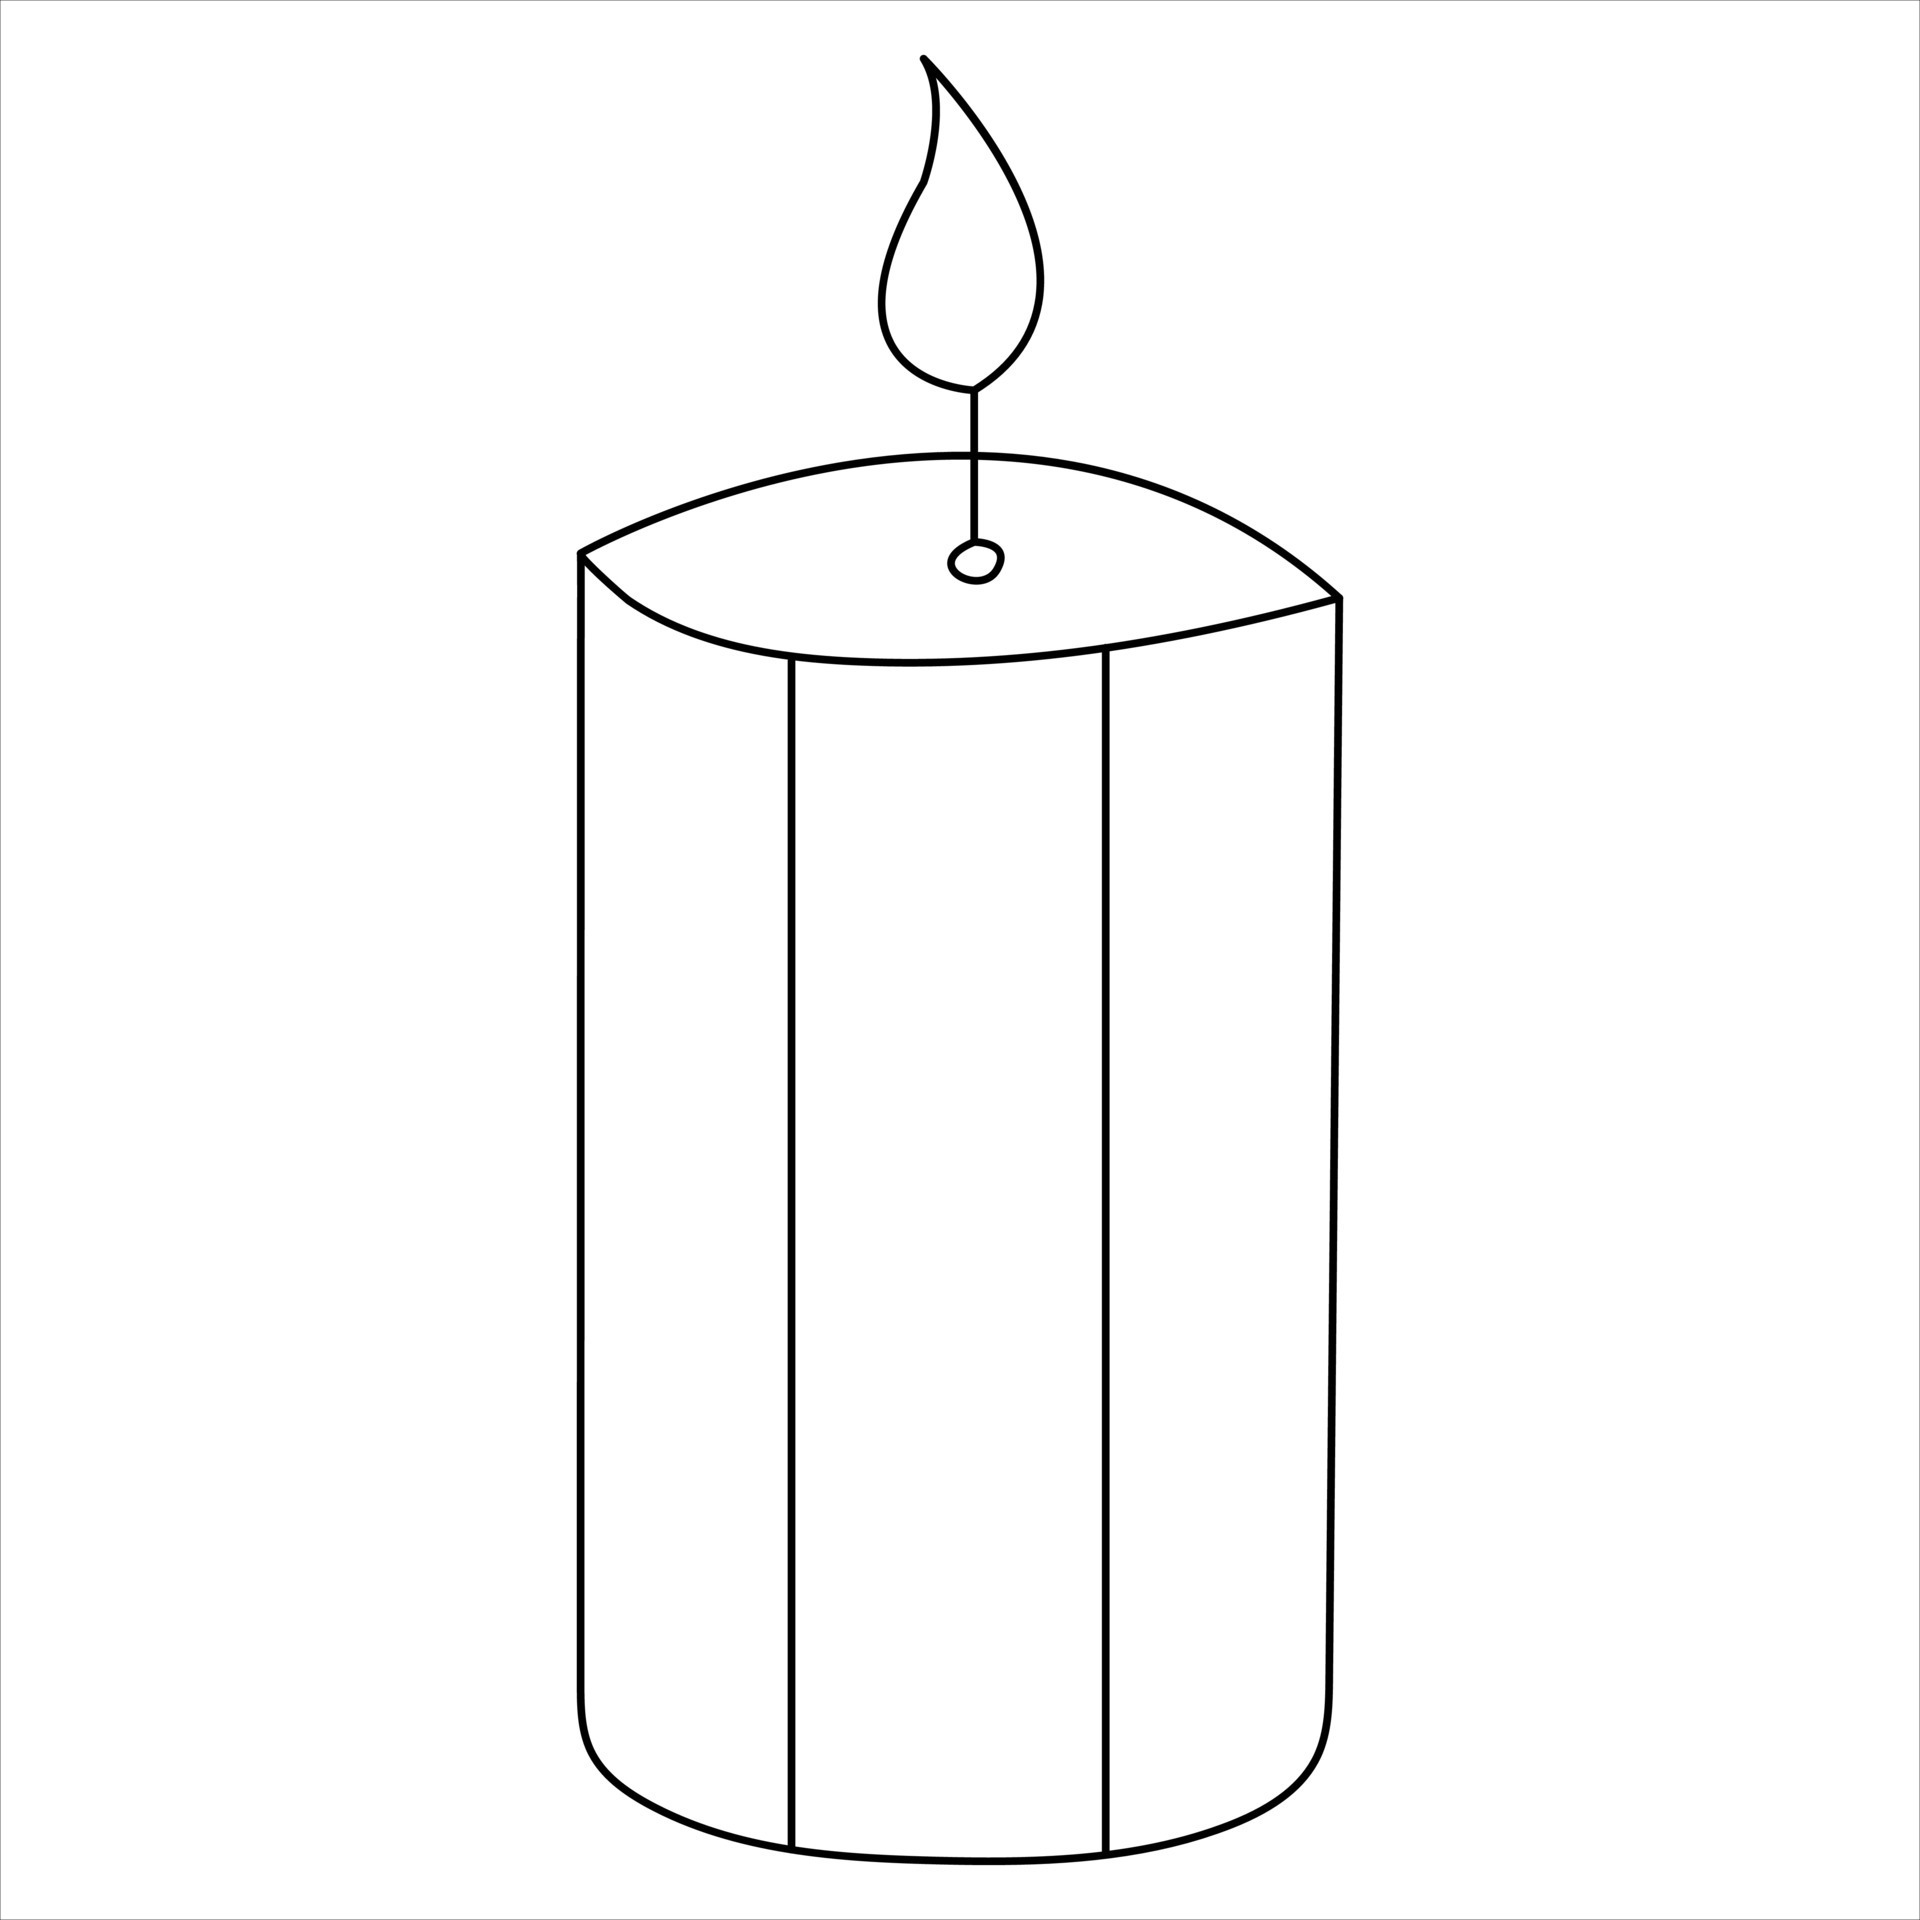 Continuous single line art drawing of candle and minimalist outline ...